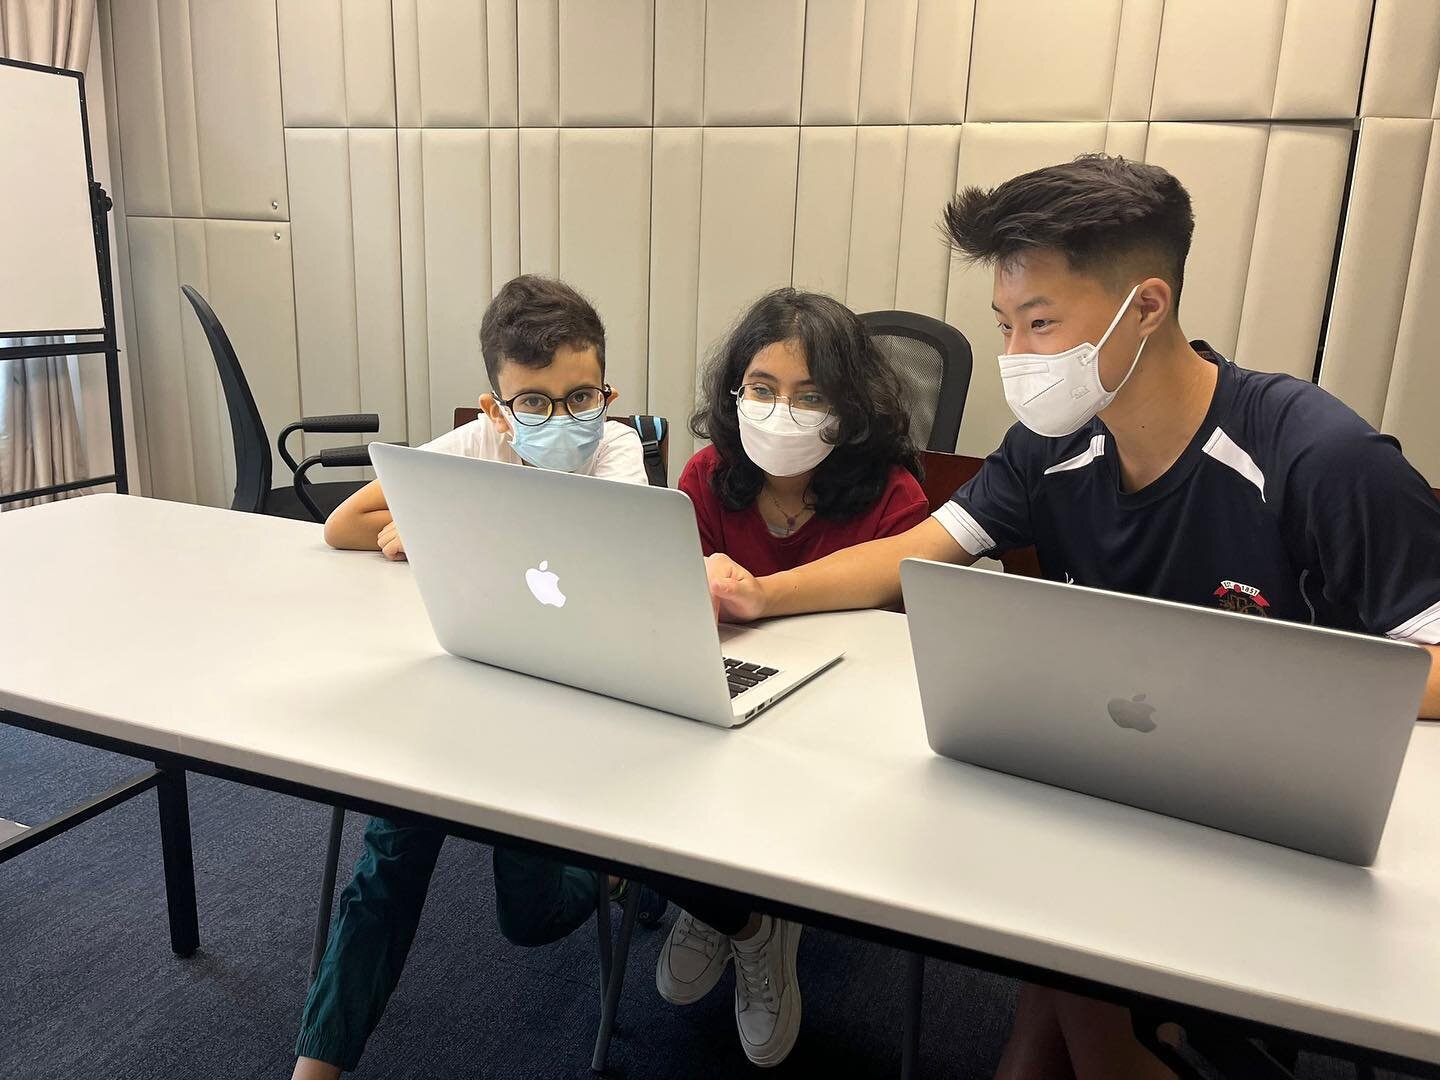 We are so excited to be hosting in-person sessions again!! 

Today's Scratch lesson was incredibly fruitful, it was great to see students to passionate and engaged with the activities! Thank you to @branchesofhopehk for partnering with us on this cou